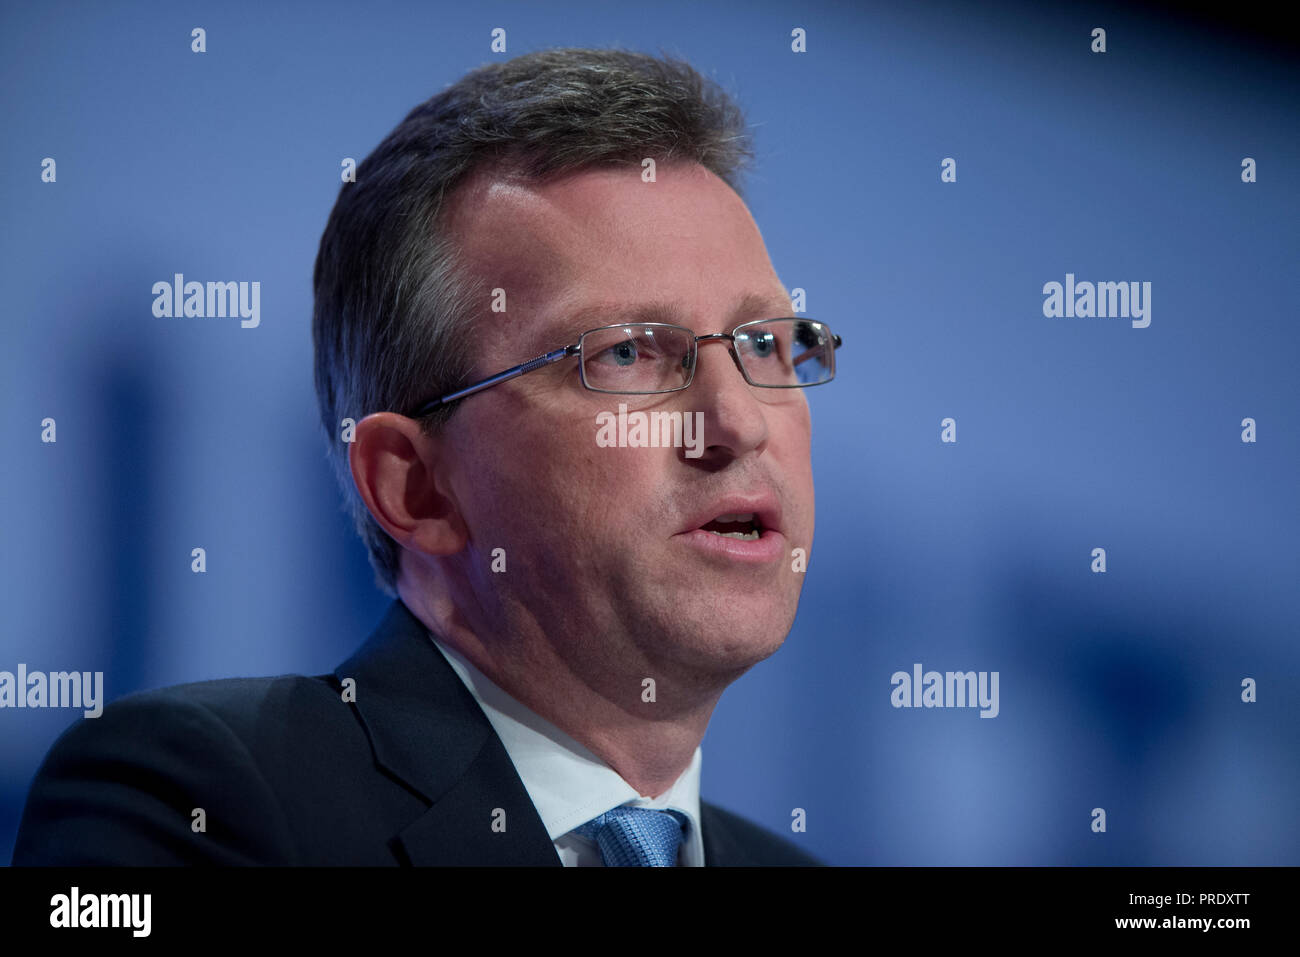 Birmingham, UK. 1st October 2018. Jeremy Wright, Secretary of State for Digital, Culture, Media and Sport and Conservative MP for Kenilworth and Southam, speaks at the Conservative Party Conference in Birmingham. © Russell Hart/Alamy Live News. Stock Photo